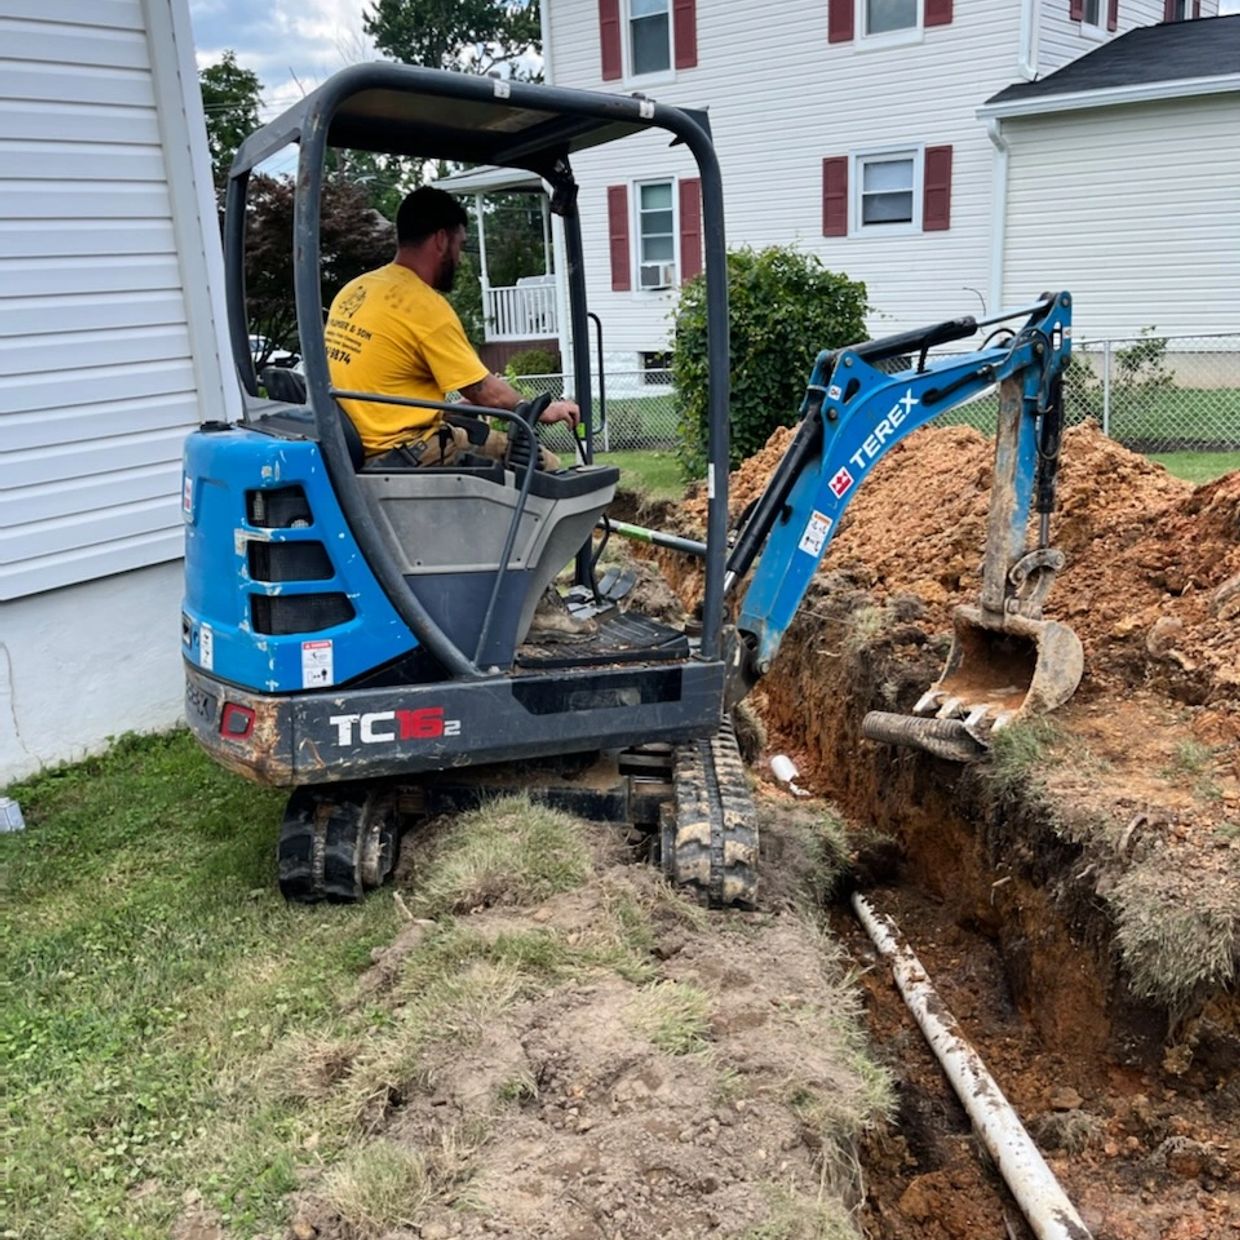 Sonny repairing a sewer pipe in Severn Md.